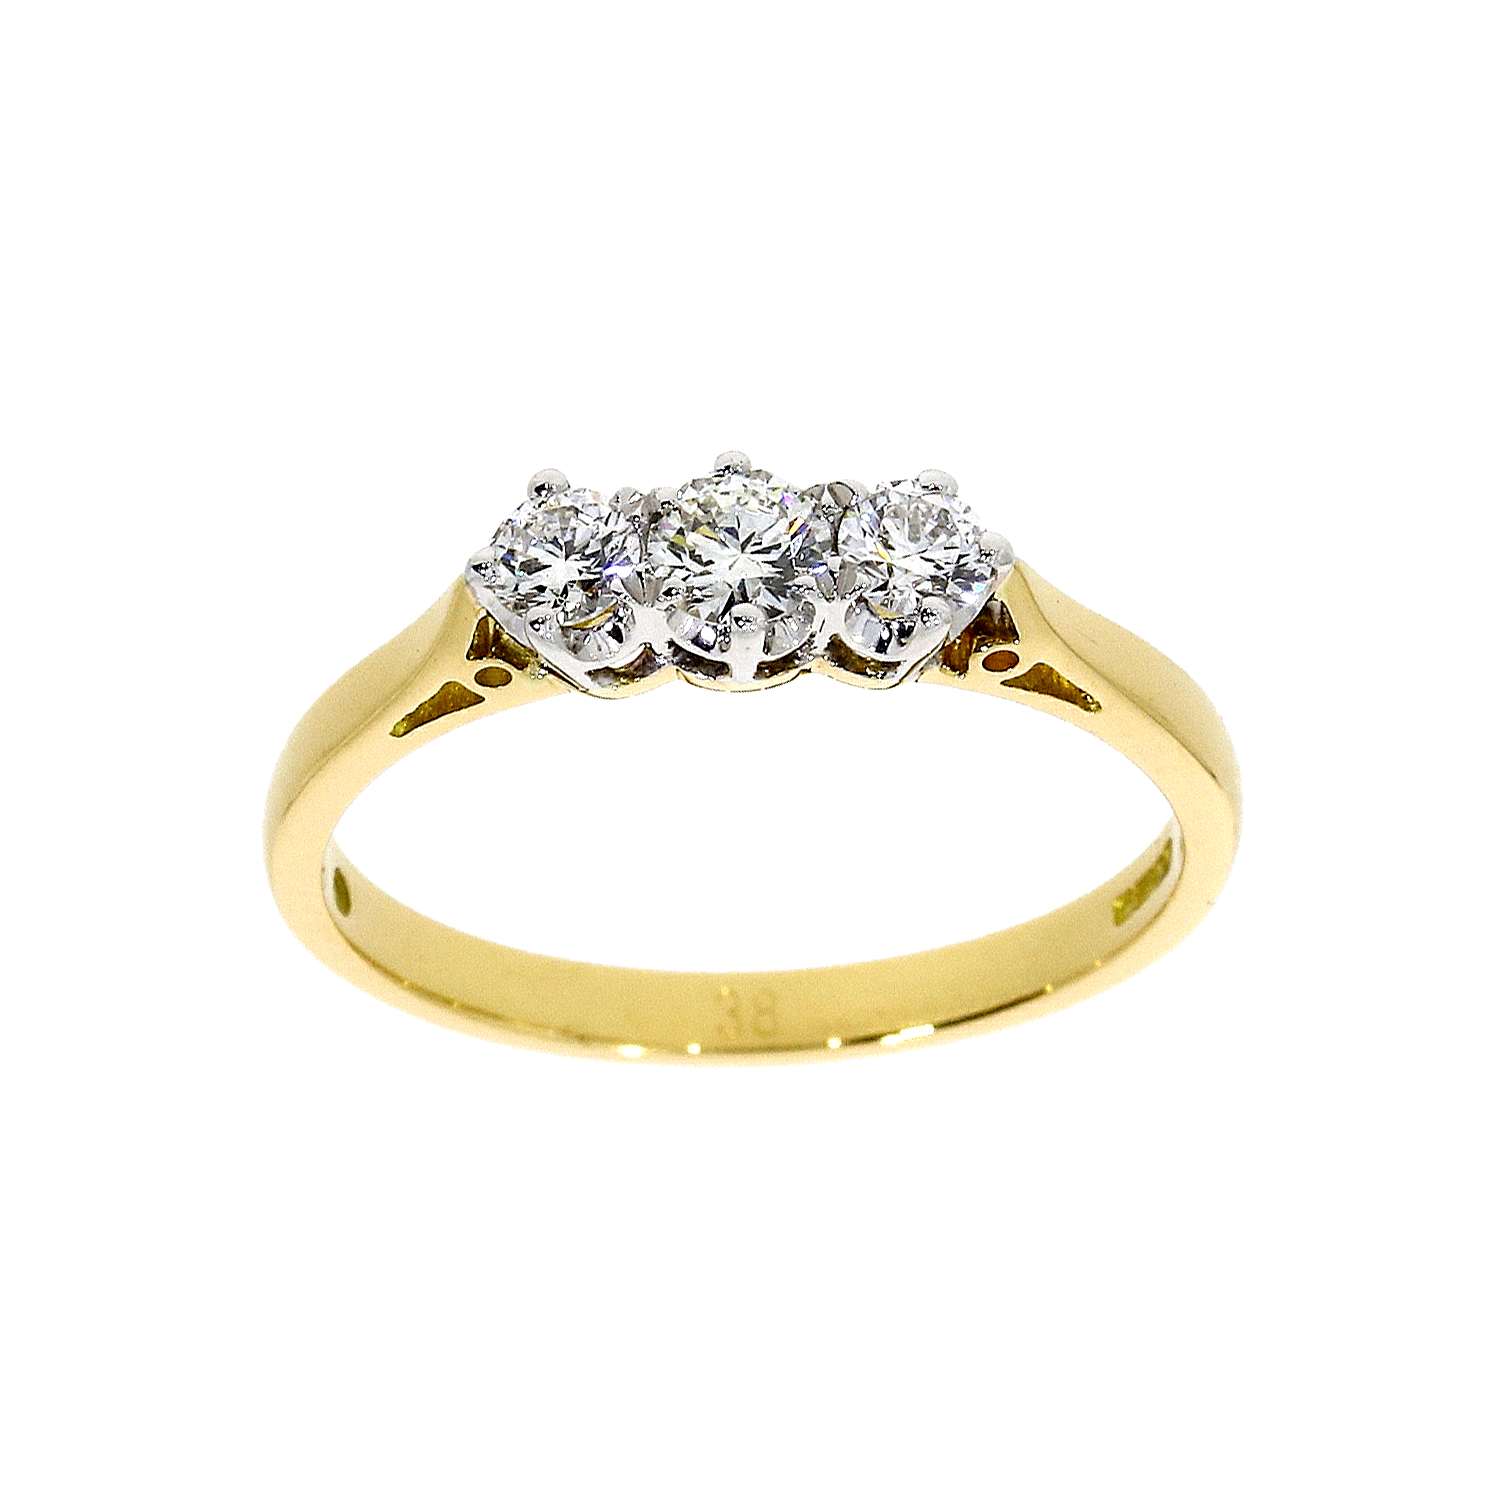 Versailles - 18ct. Yellow Gold 3-Stone Diamond Engagement Ring - 0.49cts